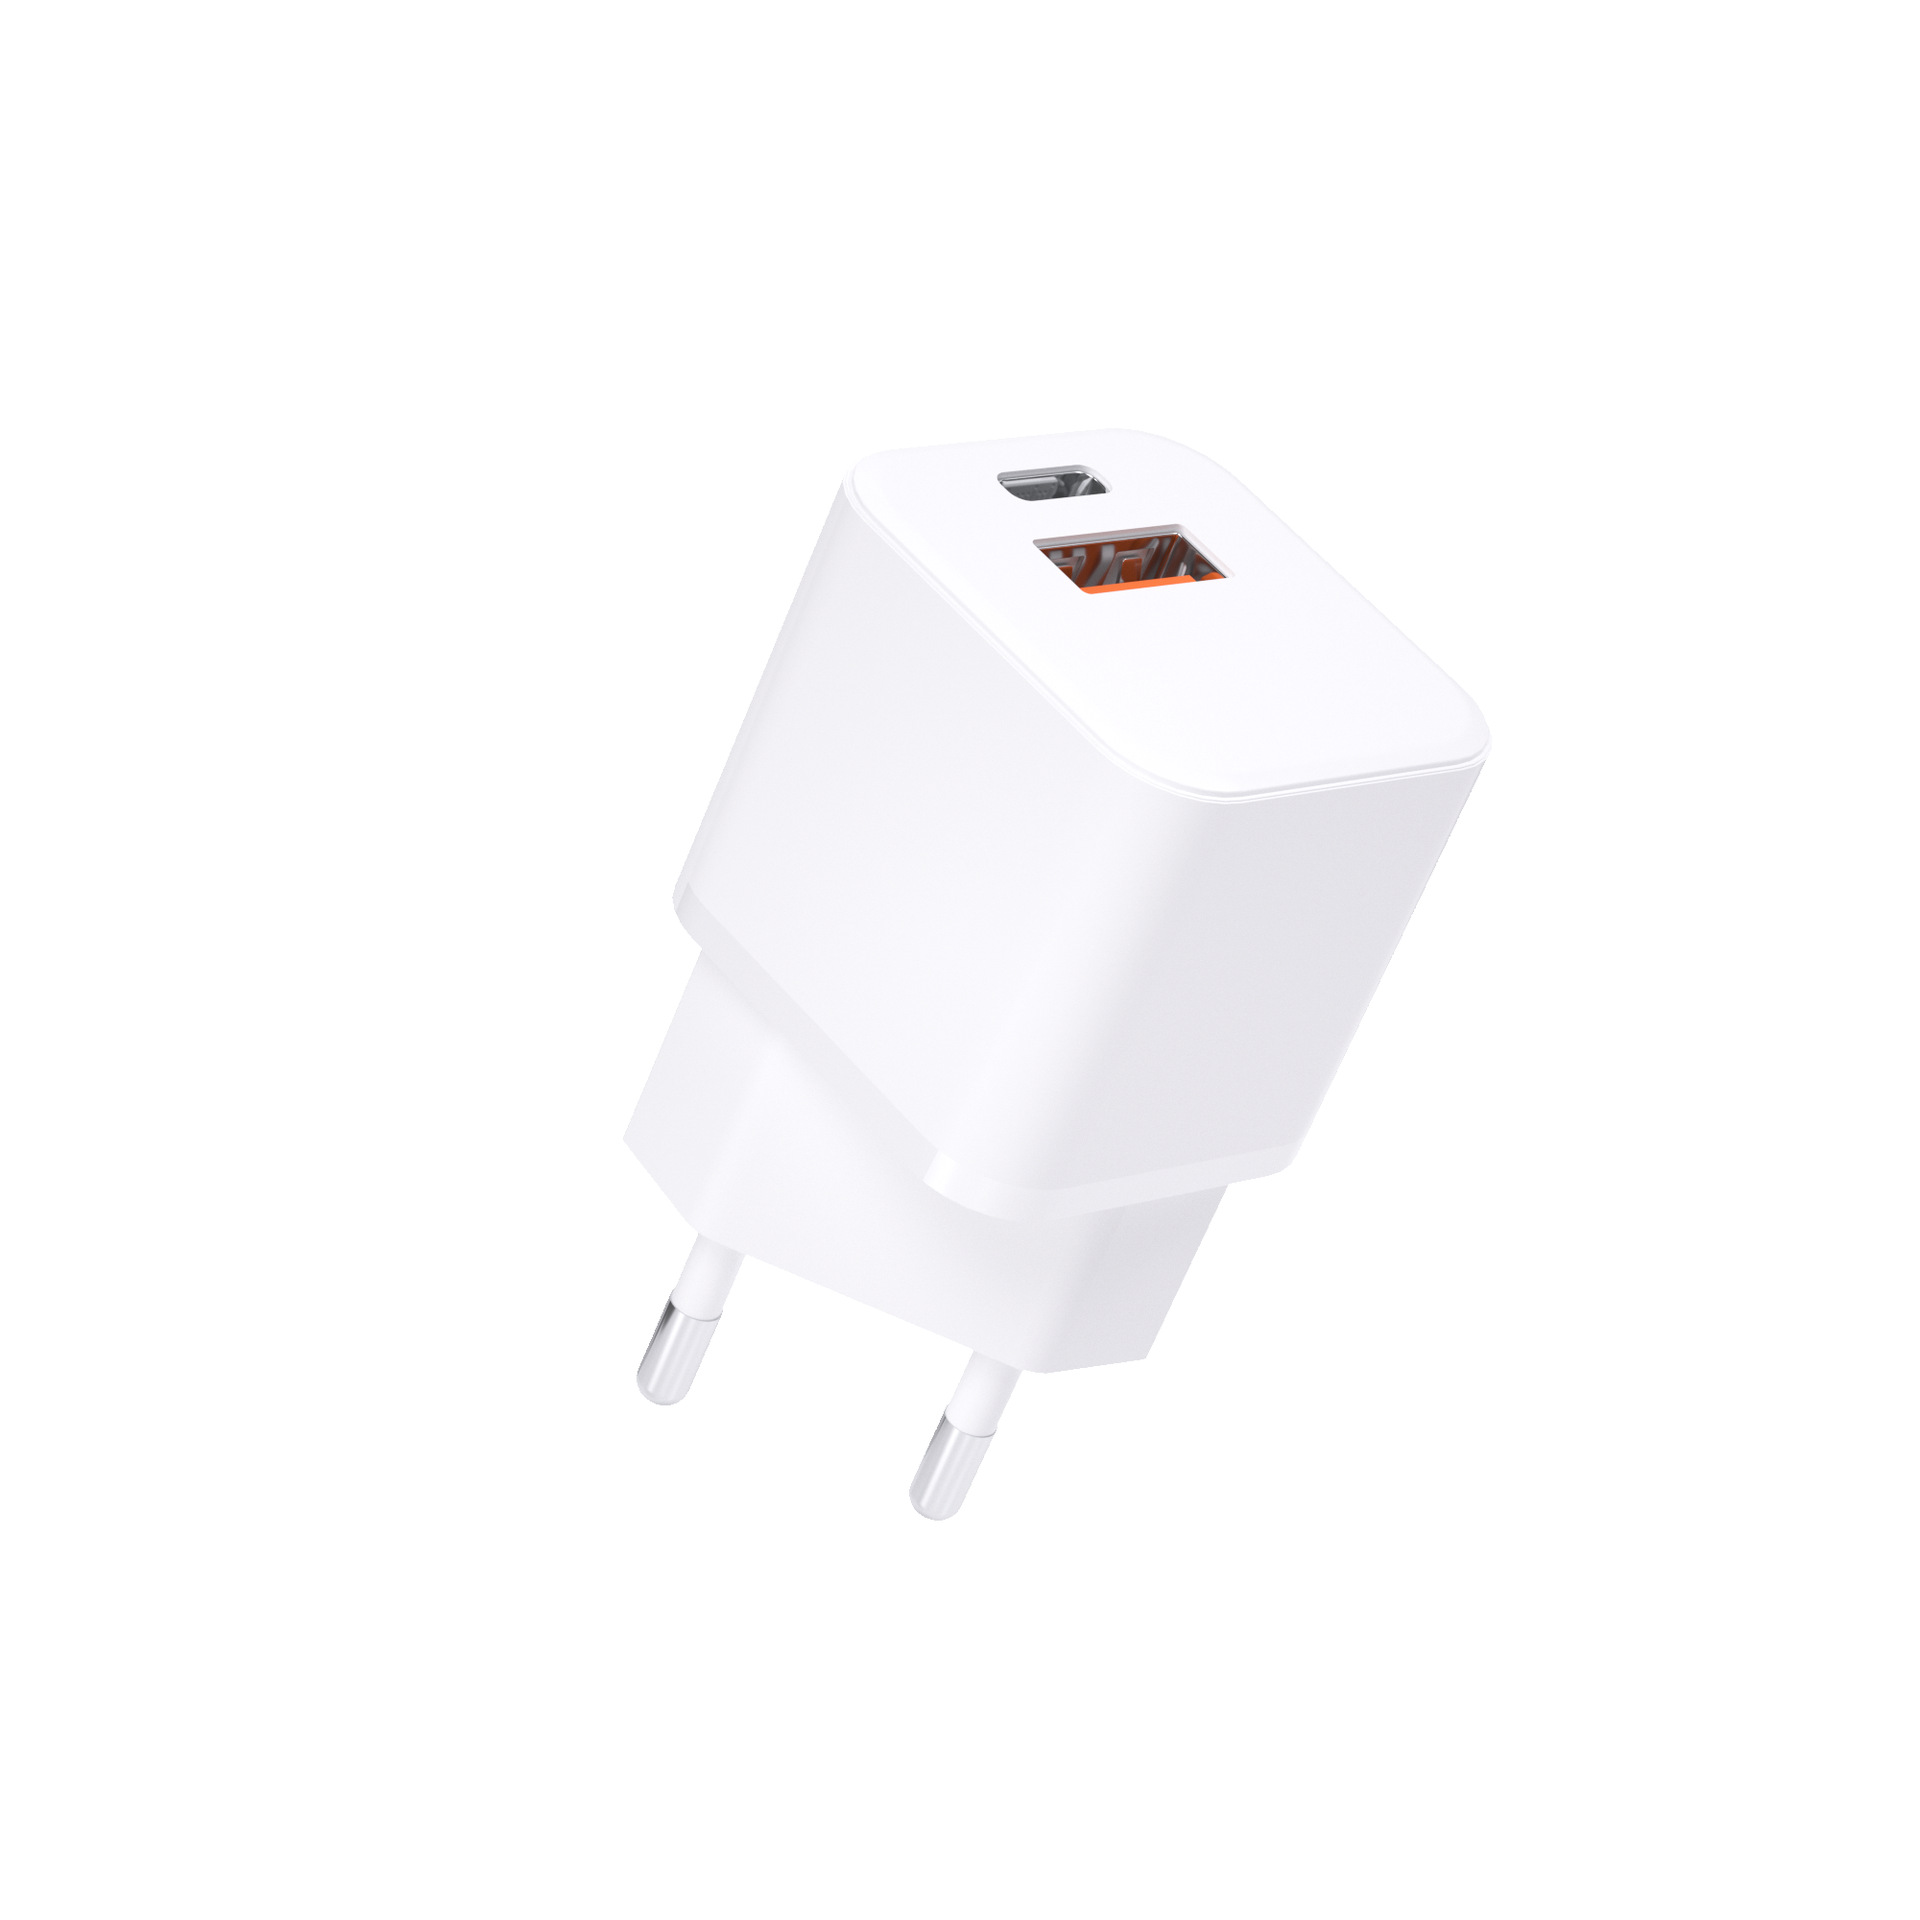 Pd30w Gallium Nitride Charger for Notebook Phone Charger Multi-Port A + C30w Gallium Nitride Charging Plug